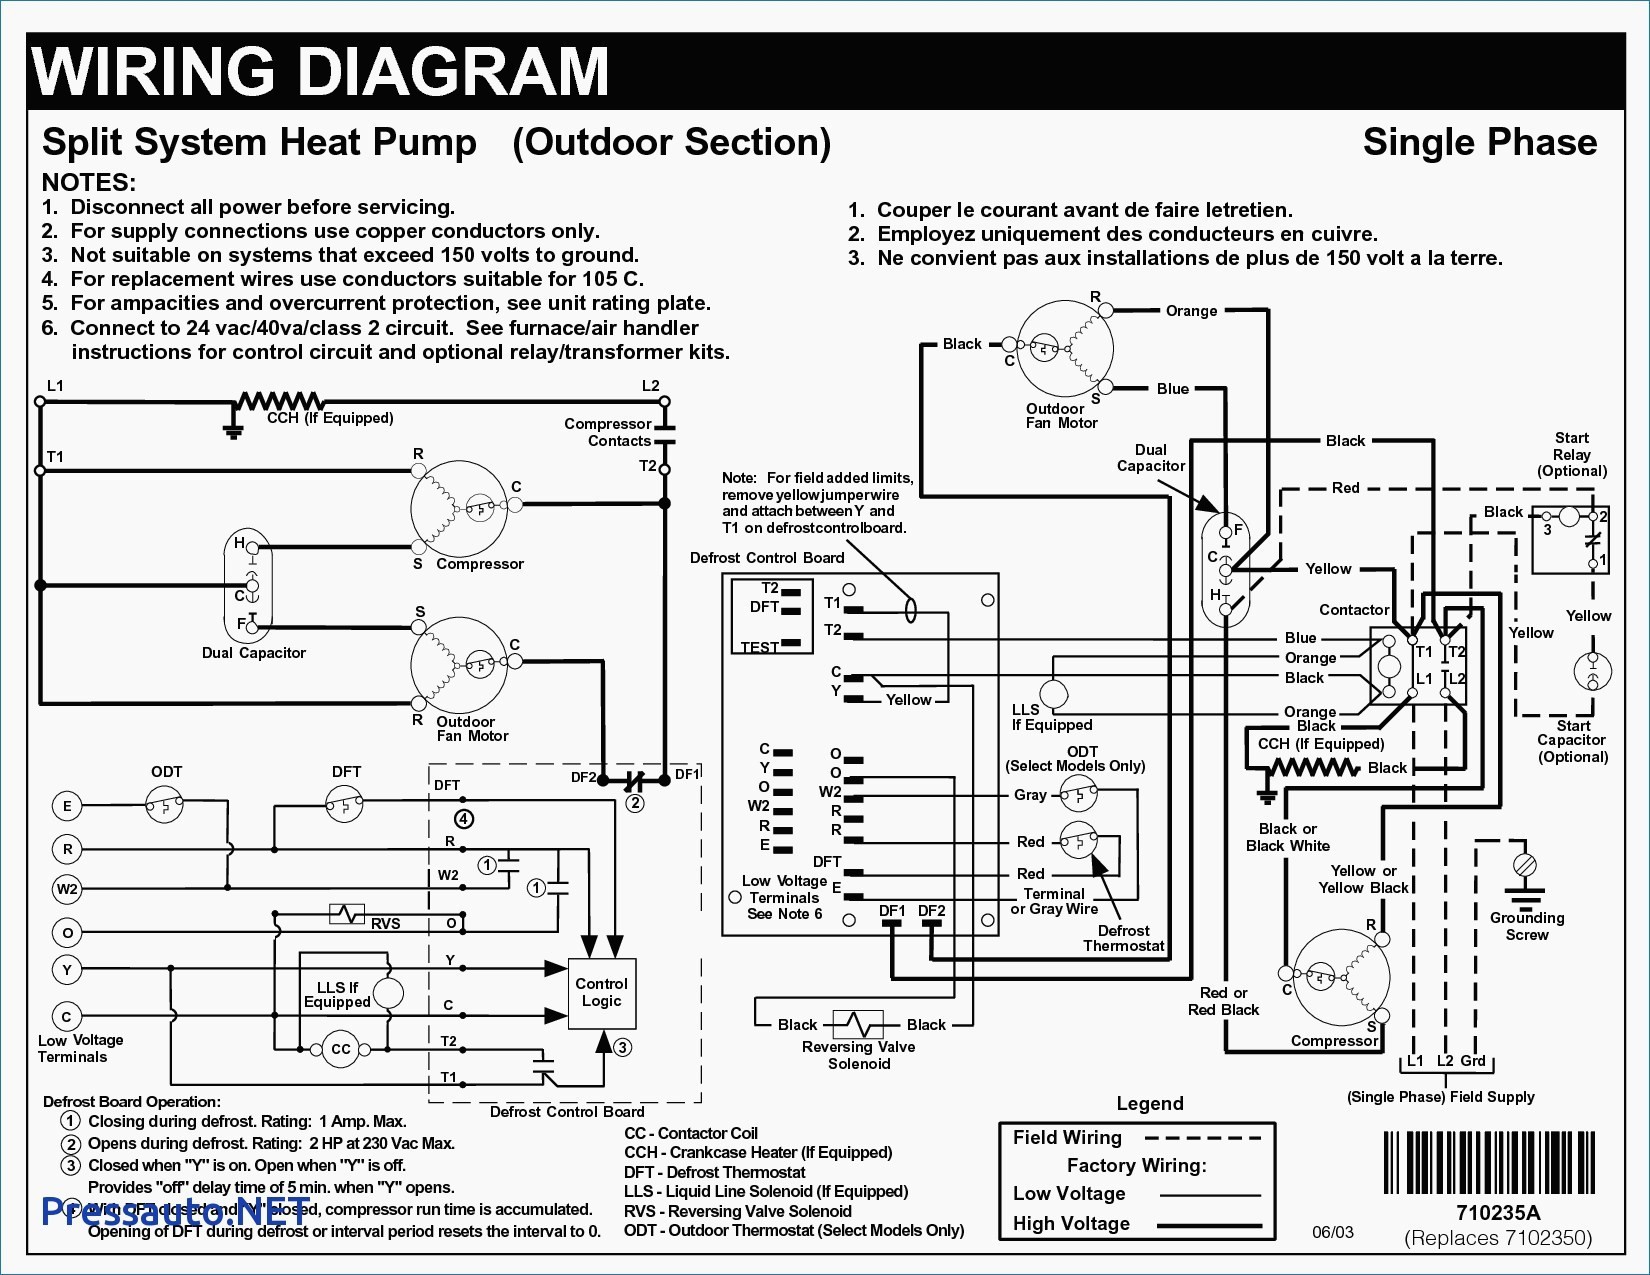 Central Air Conditioner Wiring Diagram Luxury Trane Troubleshooting Free